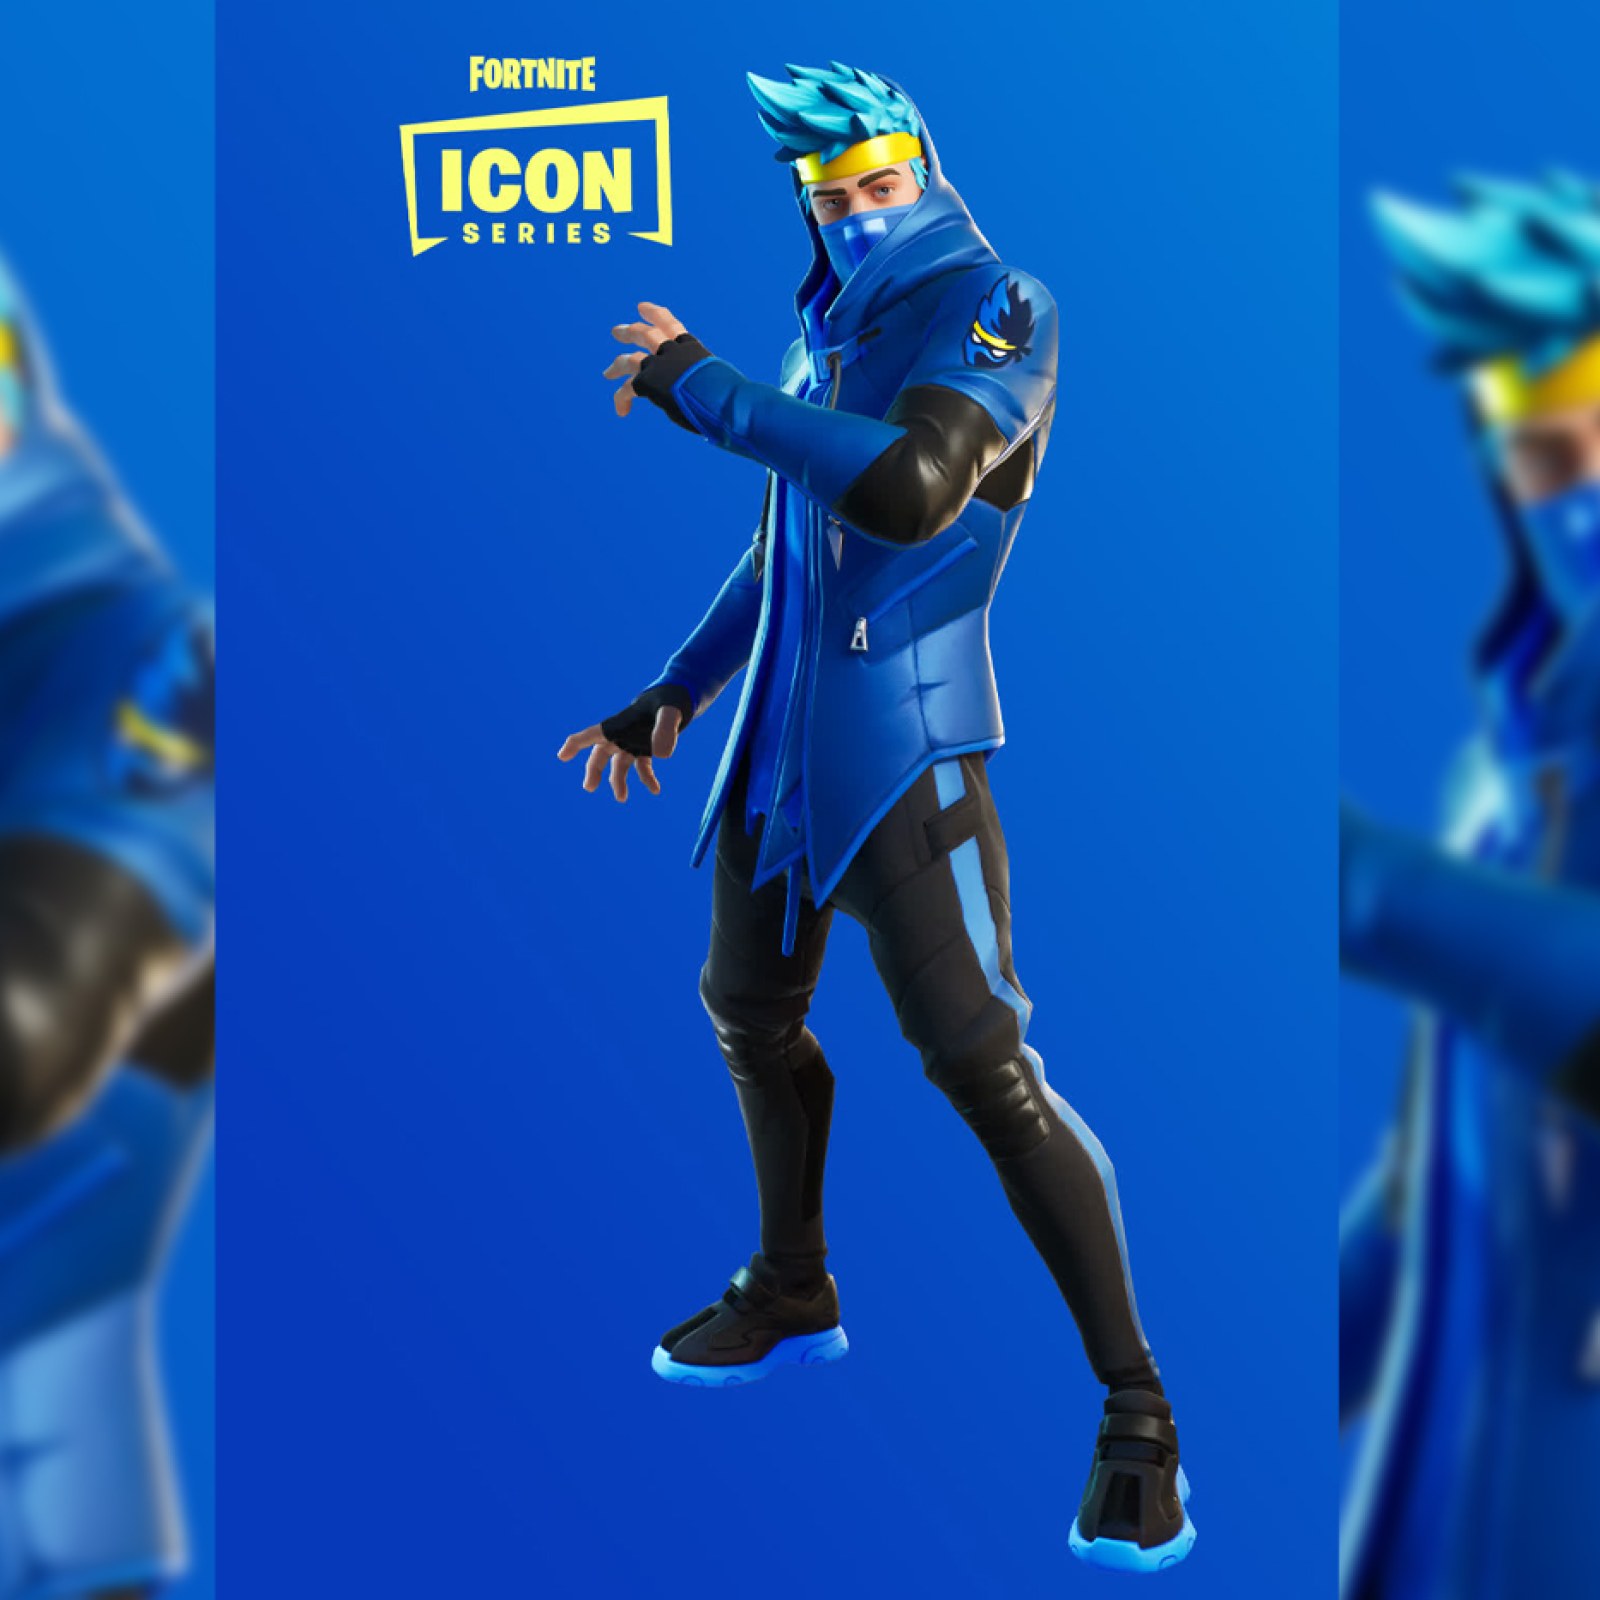 Fortnite Ninja Skin Revealed How To Get The Icon Series Outfit